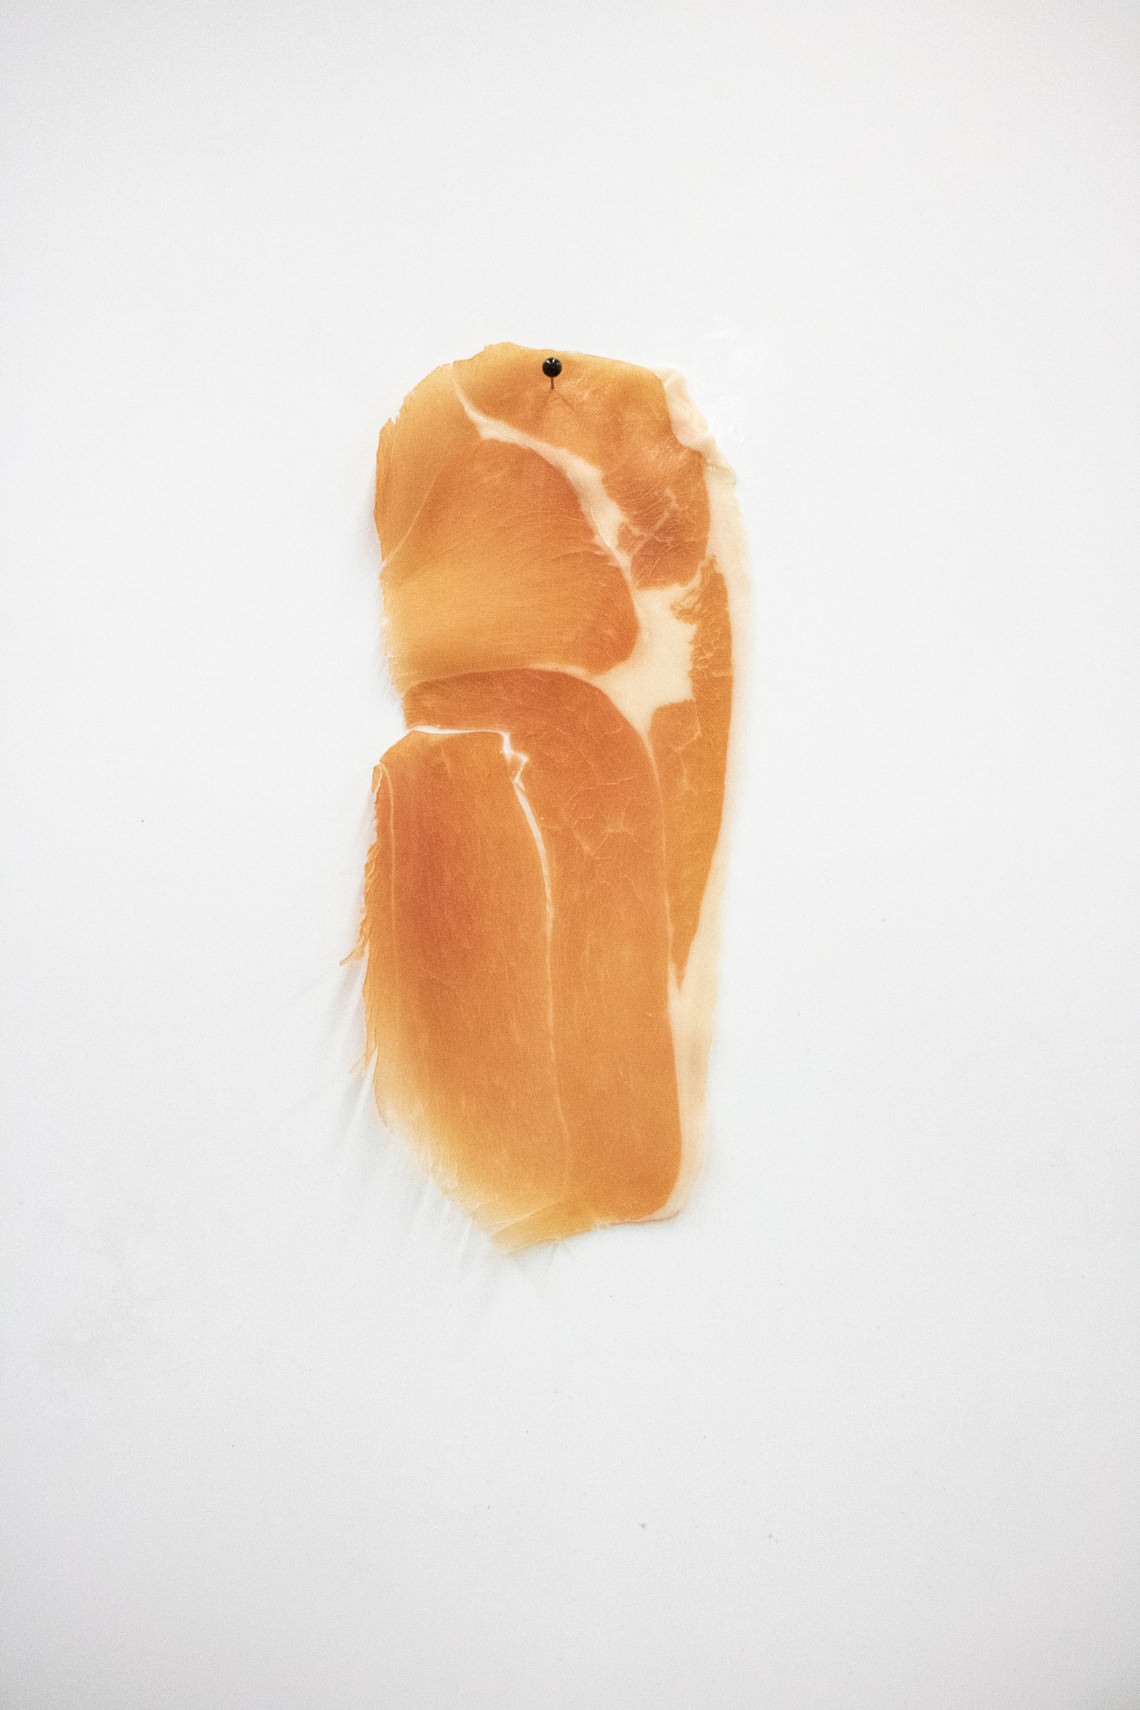  - untitled (prosciutto pinned to the wall slice after slice)